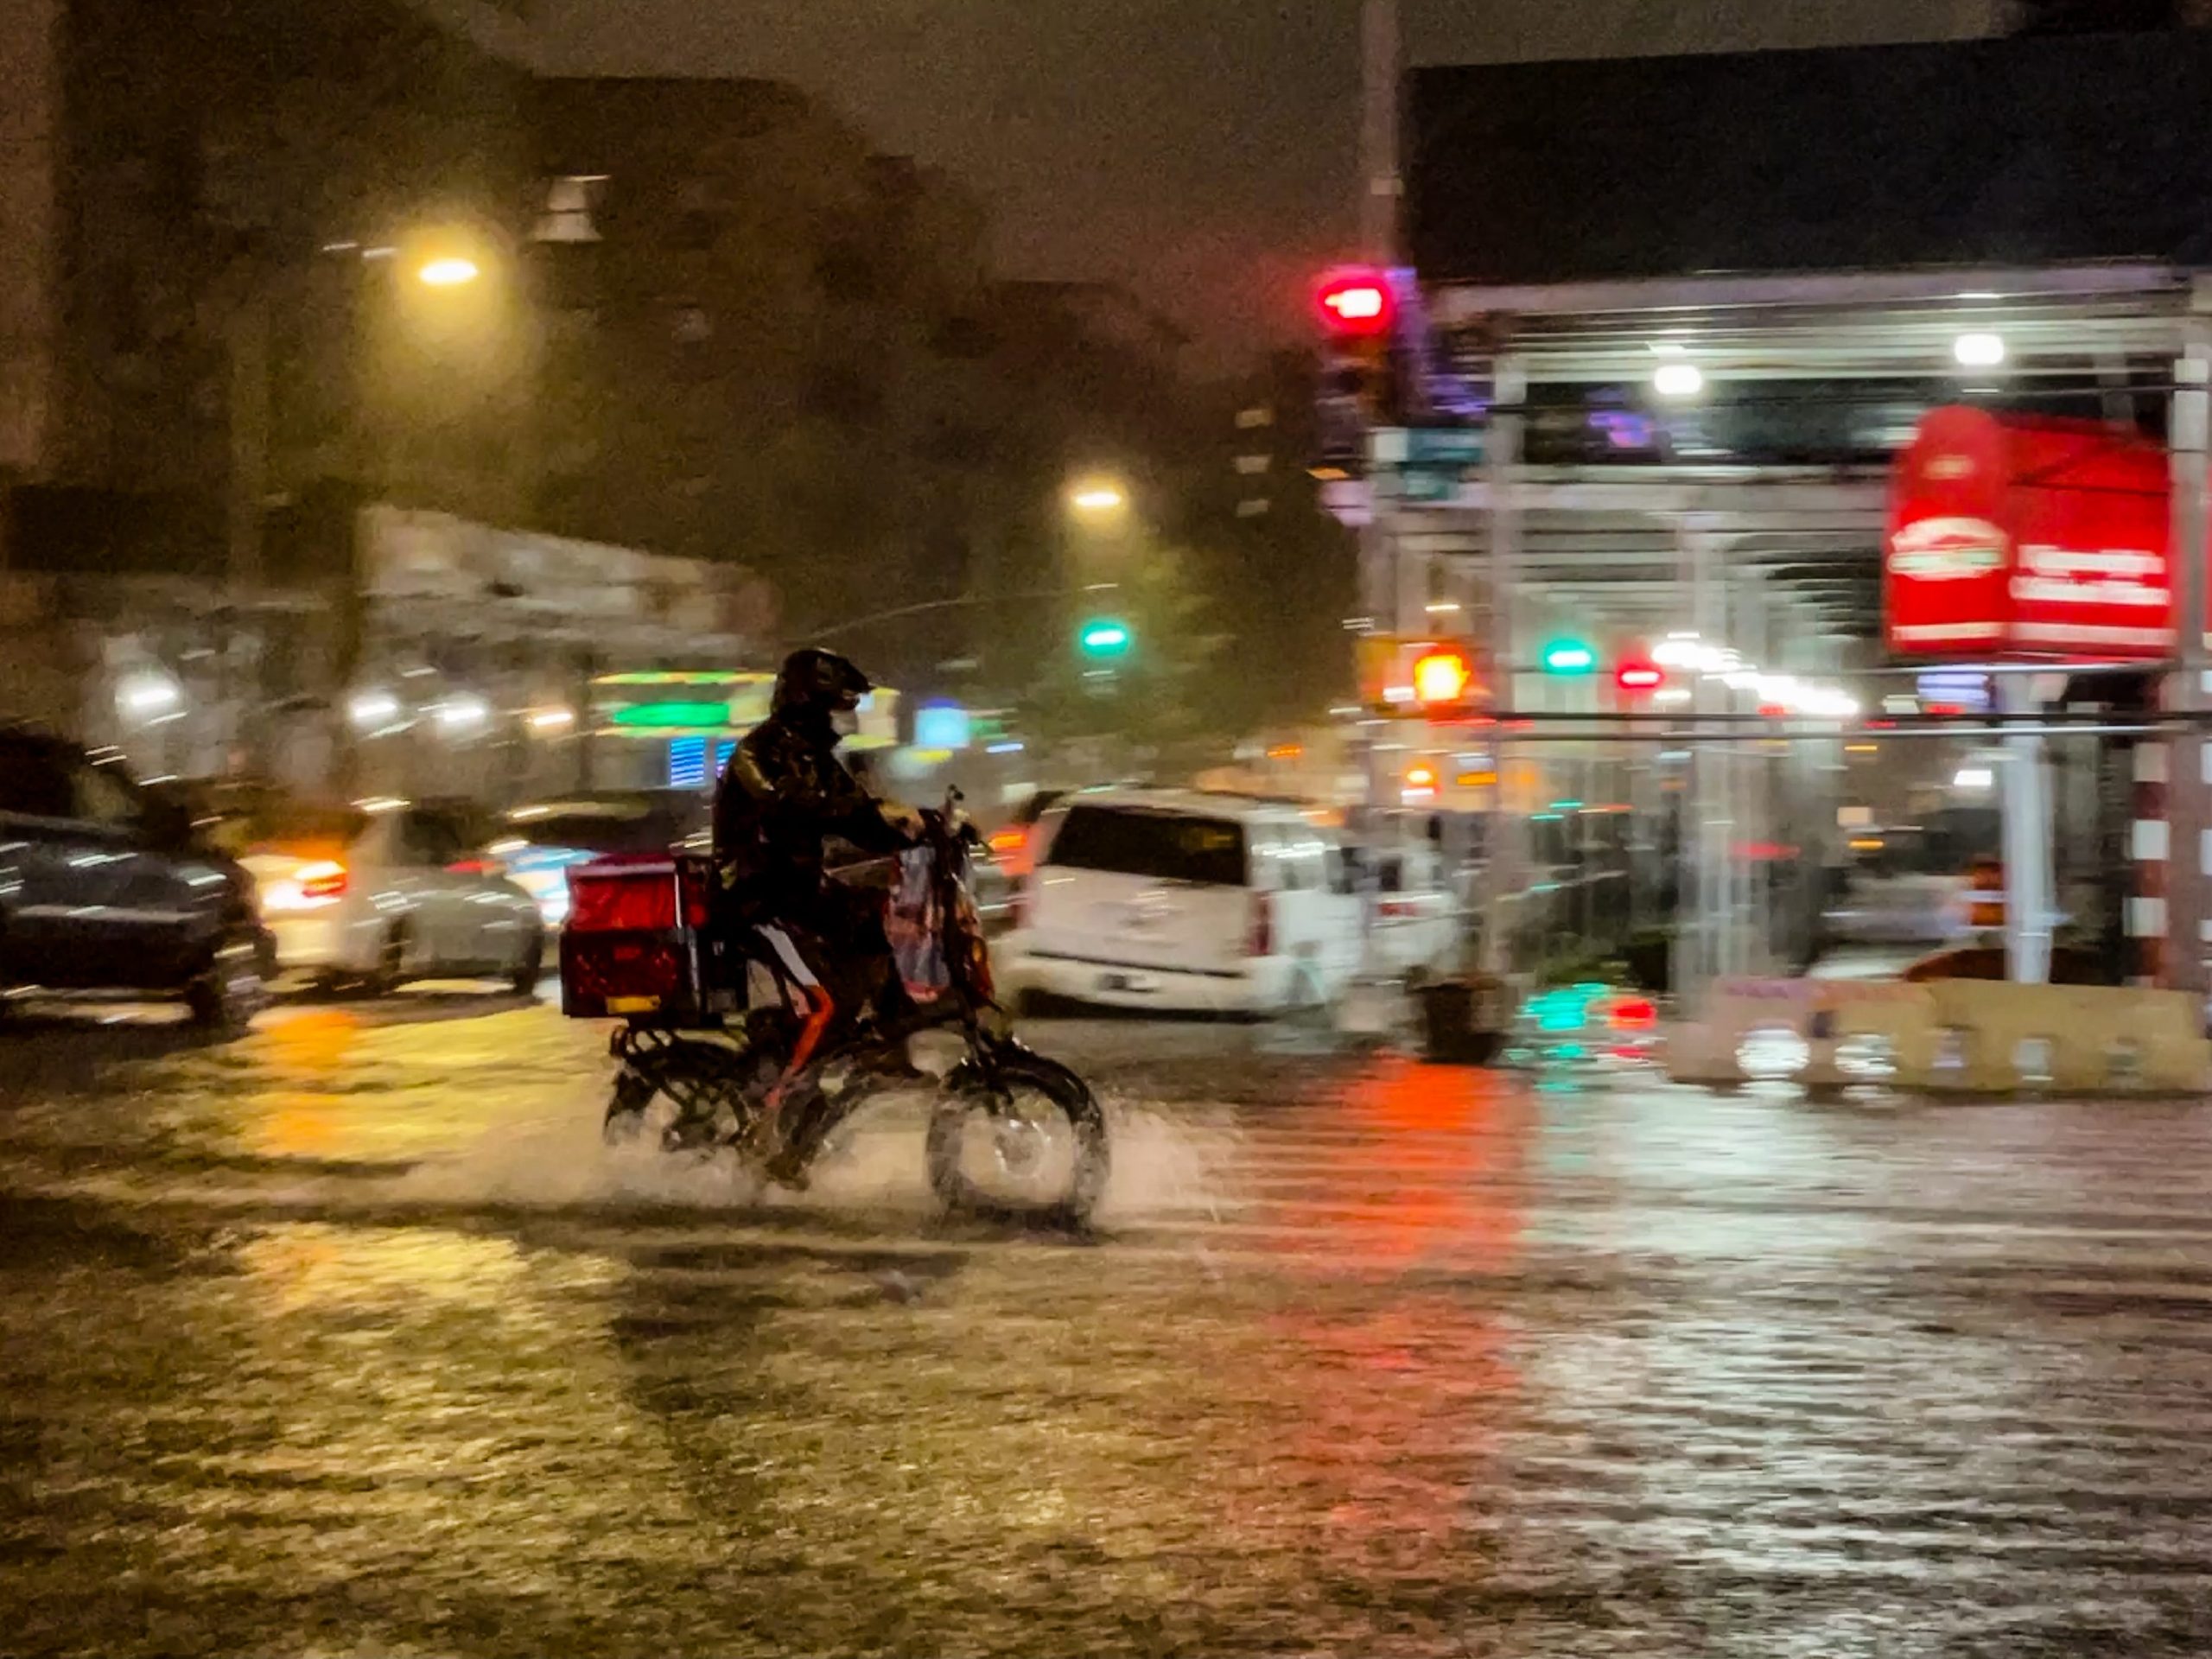 A delivery worker makes their way in the rainfall from Hurricane Ida during a flood on Intervale Avenue on September 1, 2021, in the Bronx borough of New York City. The once category 4 hurricane passed through New York City, dumping 3.15 inches of rain in the span of an hour at Central Park.